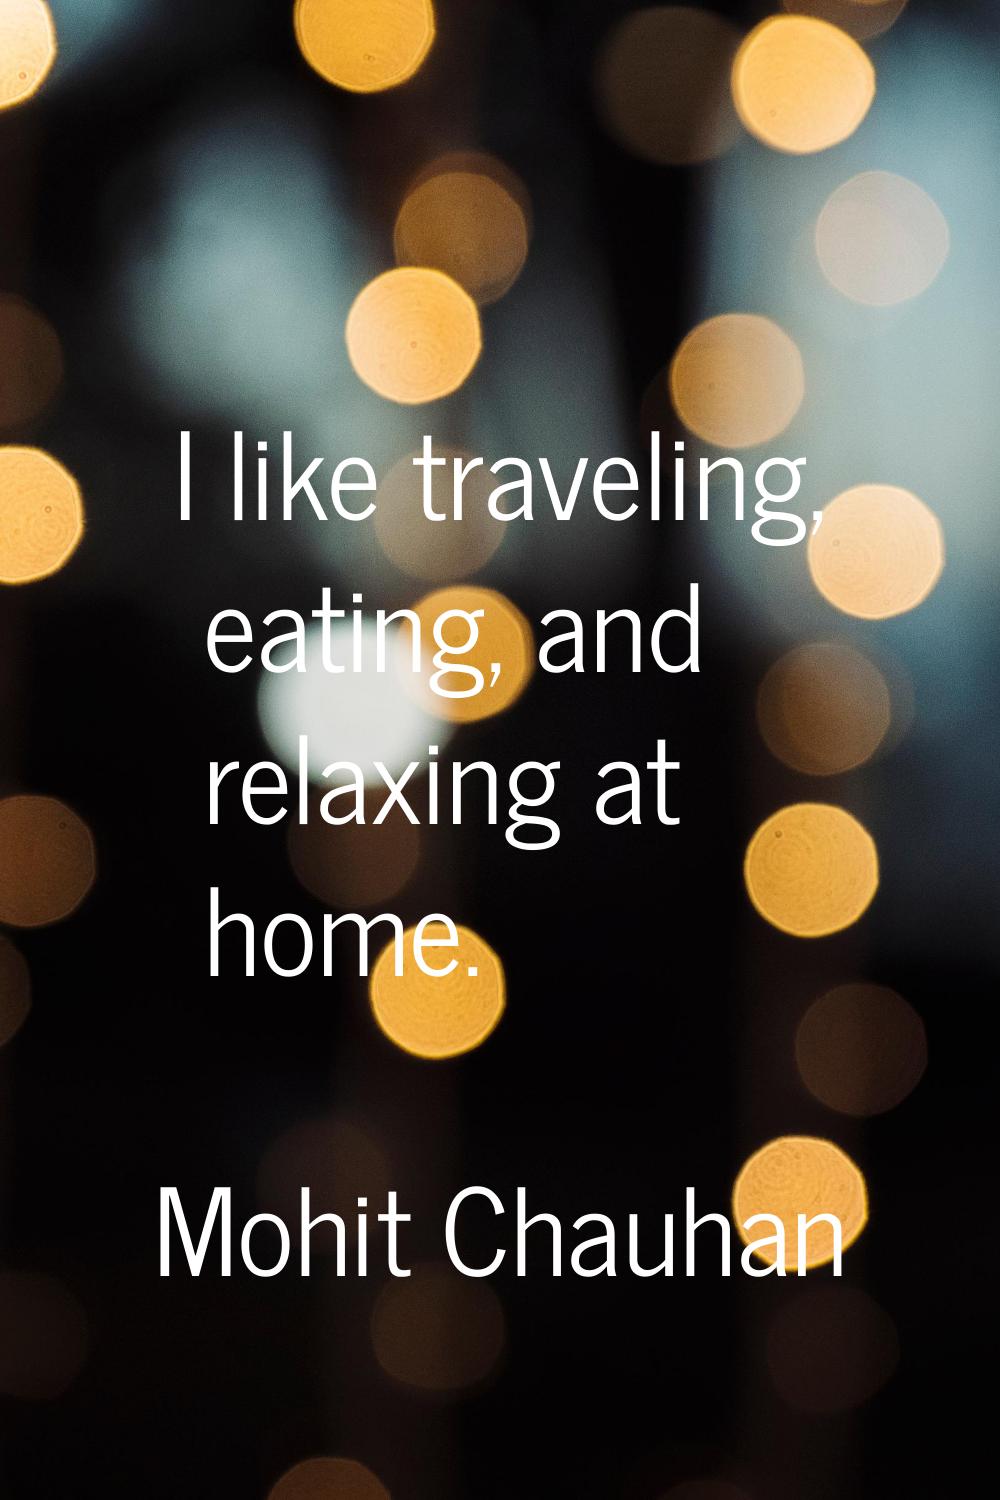 I like traveling, eating, and relaxing at home.